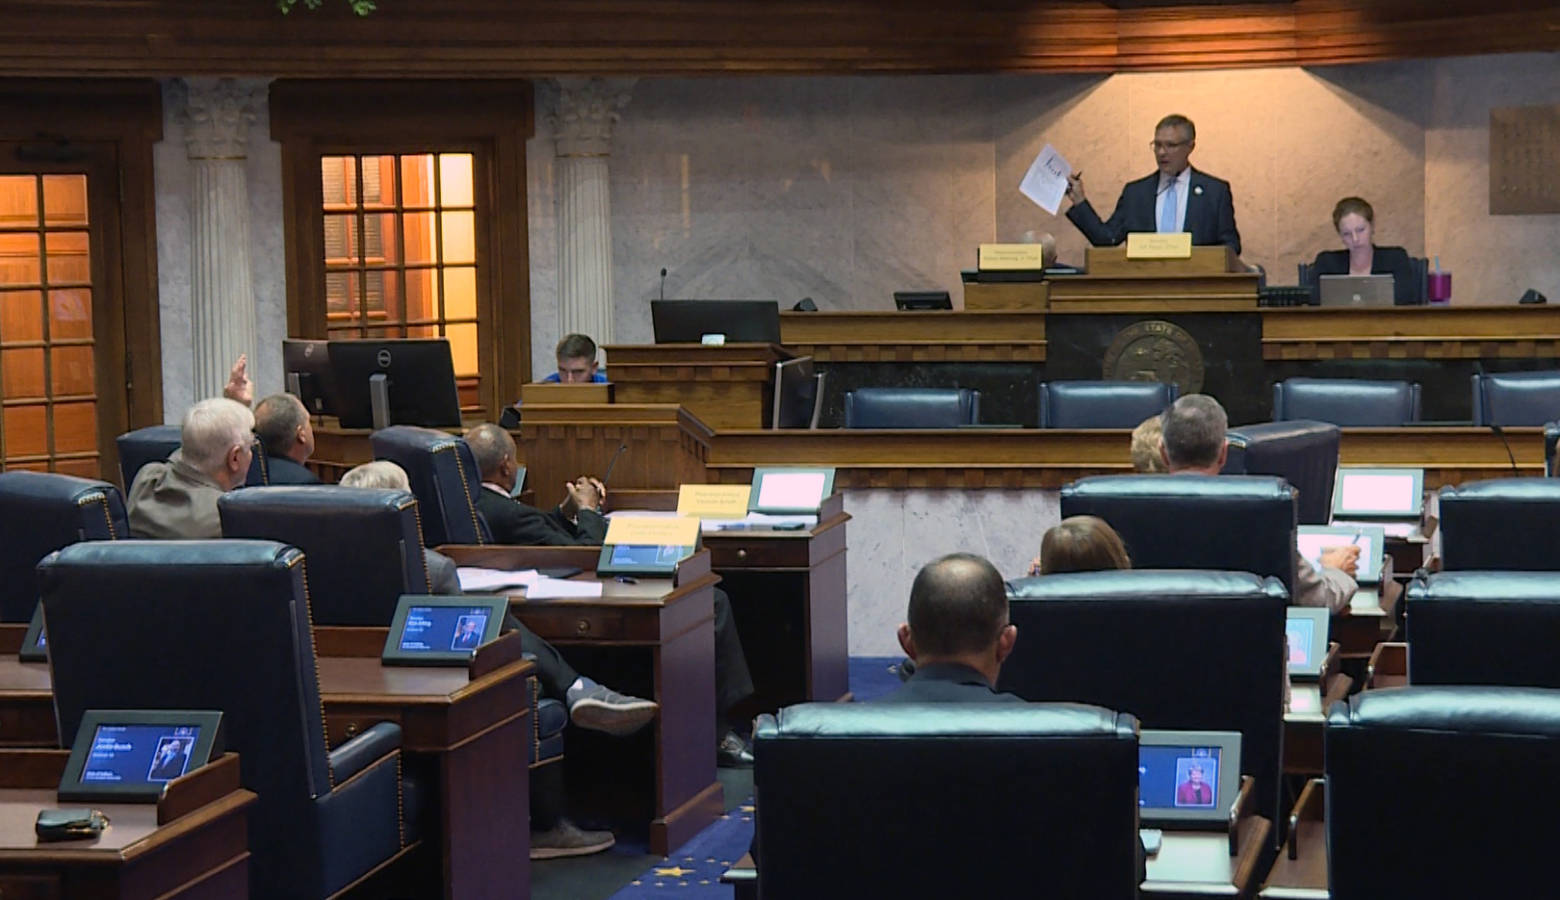 The education-focused summer study committee meets for the final time of 2019 in the Senate chamber. Lawmakers on the committee also serve on the education committees during the legislative session. (Jeanie Lindsay/IPB News)